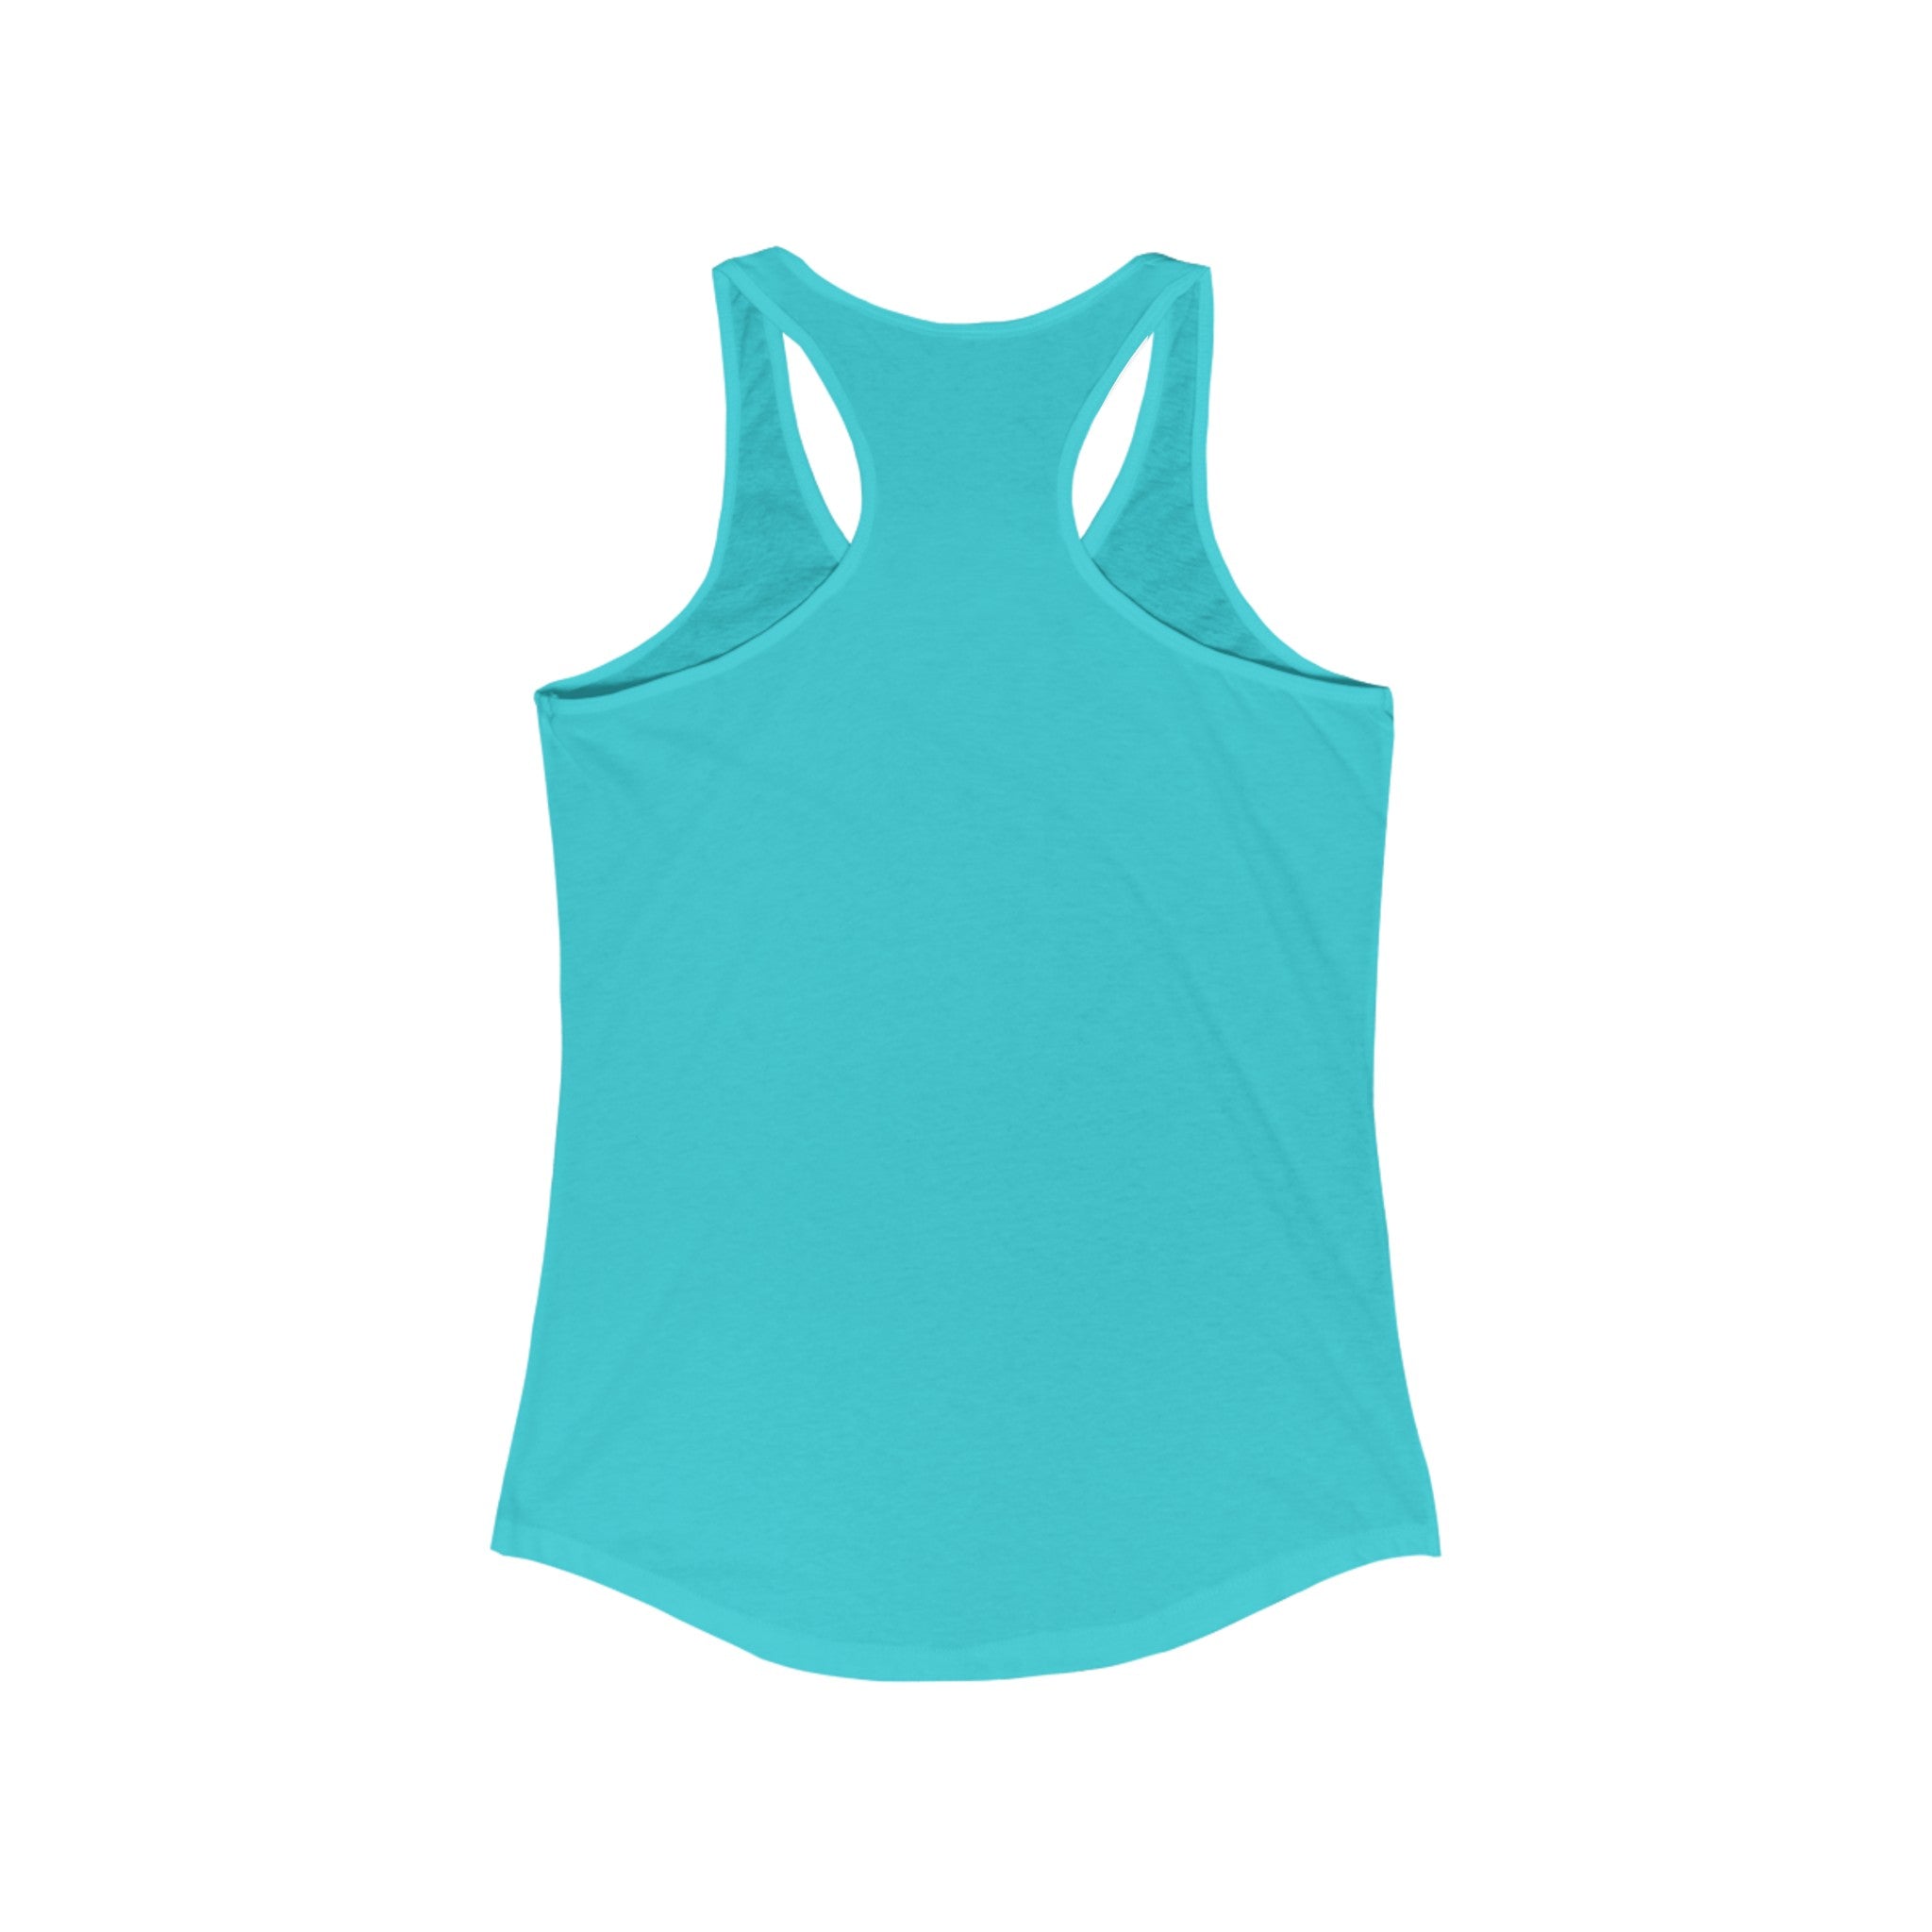 5964496604251629305_2048_eb6311c2-db99-4ddc-8824-19f3f967f2bf.jpg - Keep on Detailing v2 Women's Tank - Undrdog Surface Products